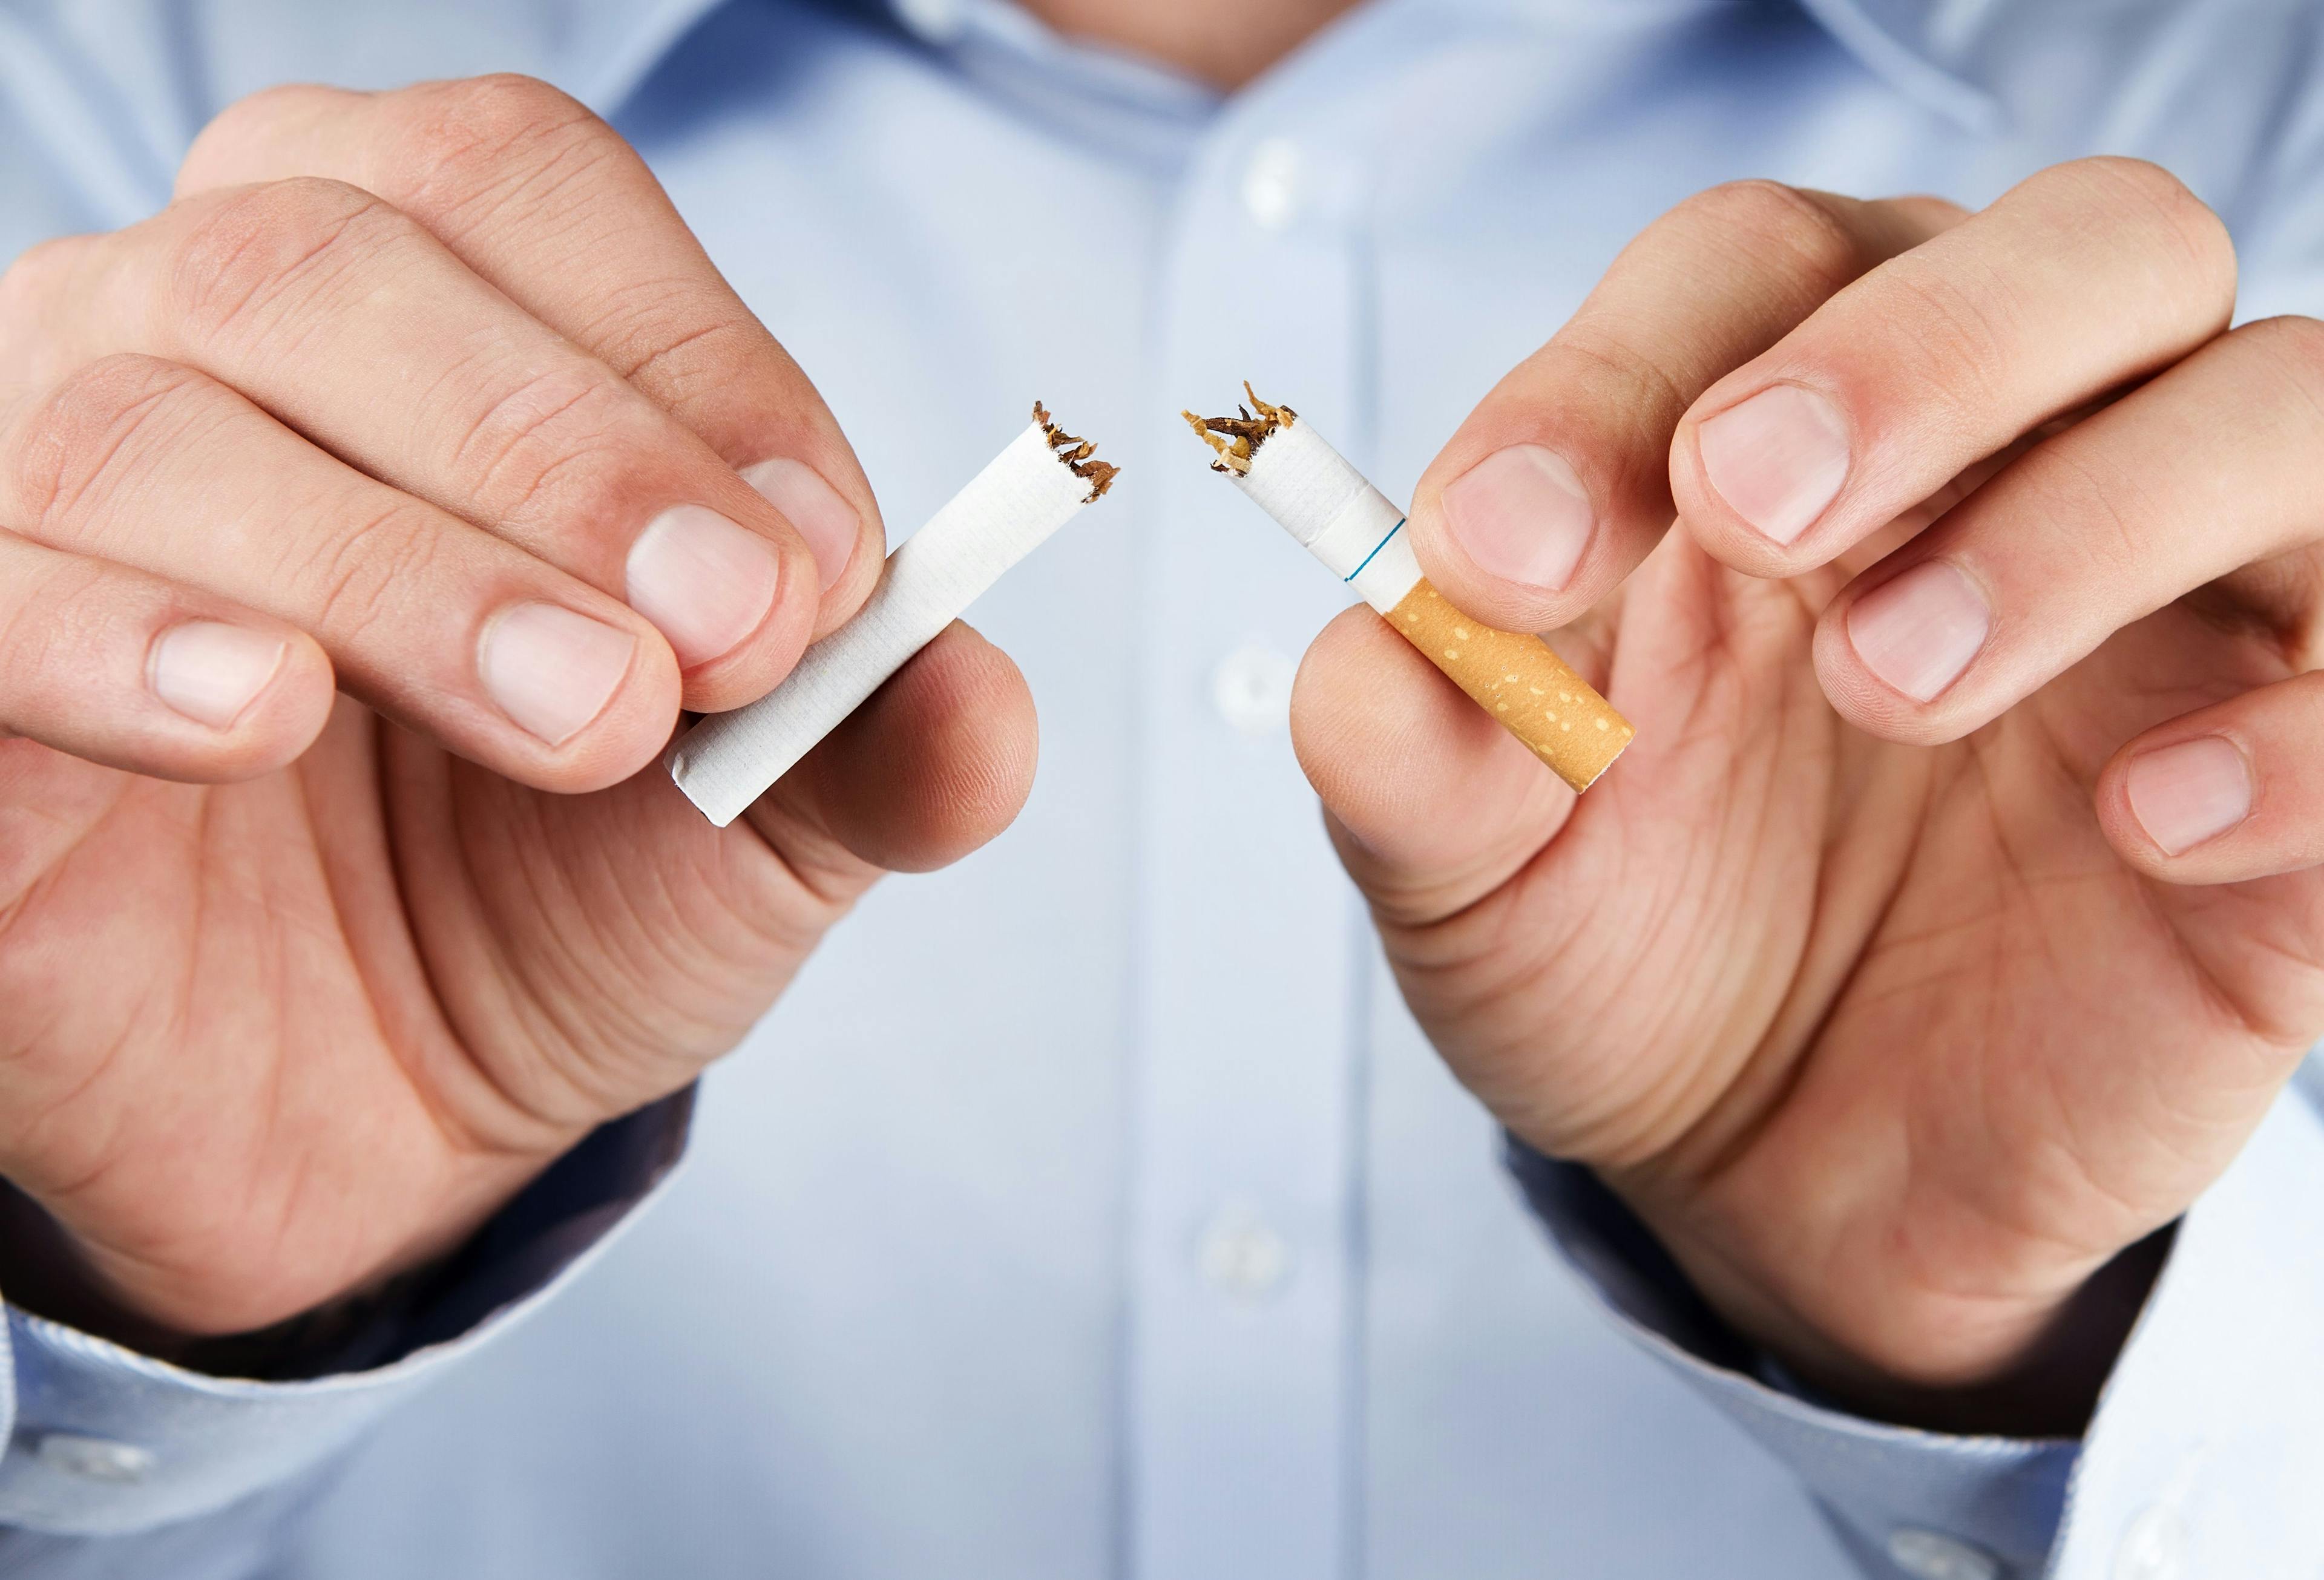 Saving money may lead to longer life, ‘but just don’t smoke’